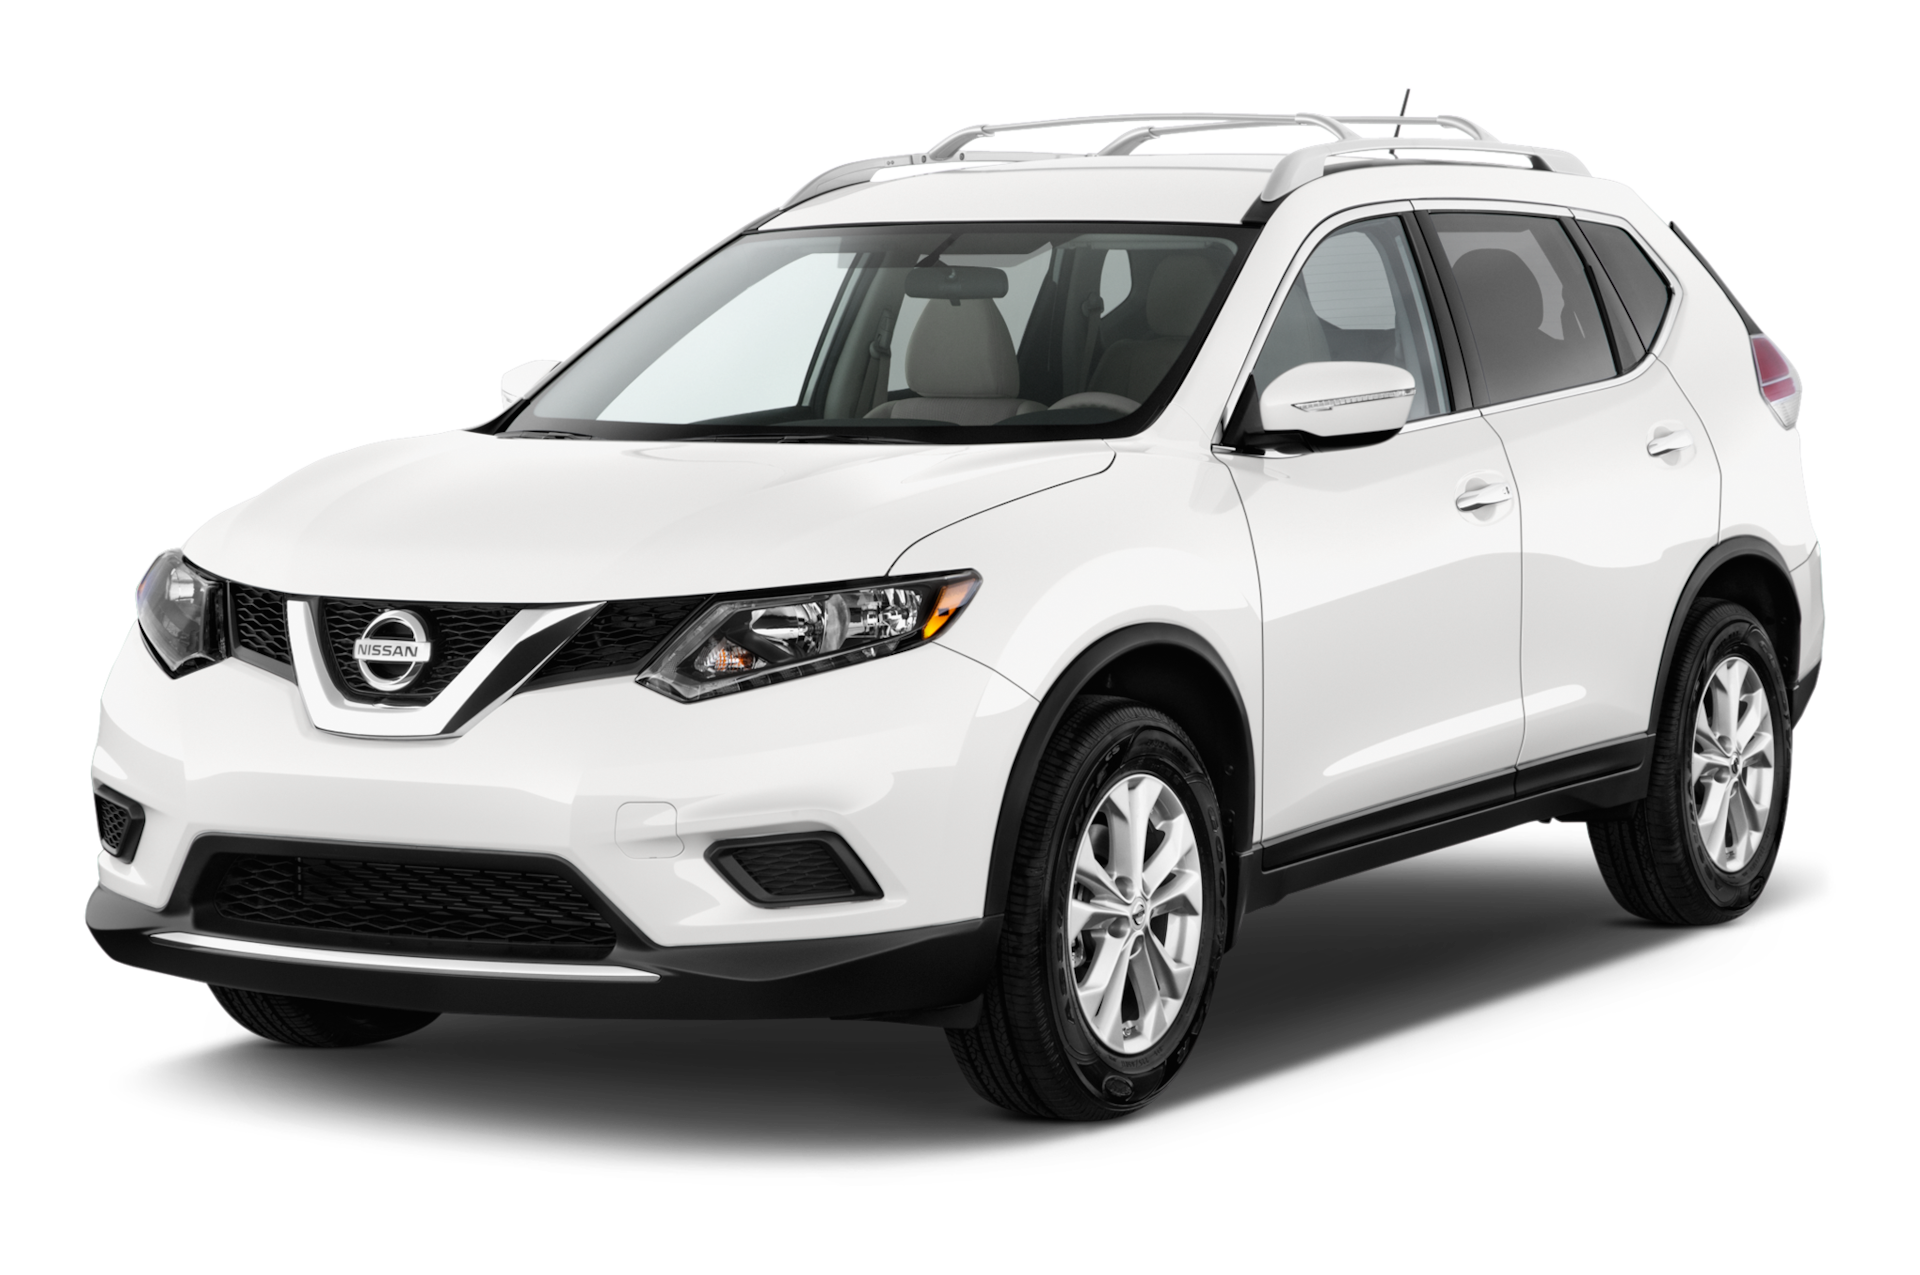 2014 Nissan Rogue Prices, Reviews, and Photos - MotorTrend